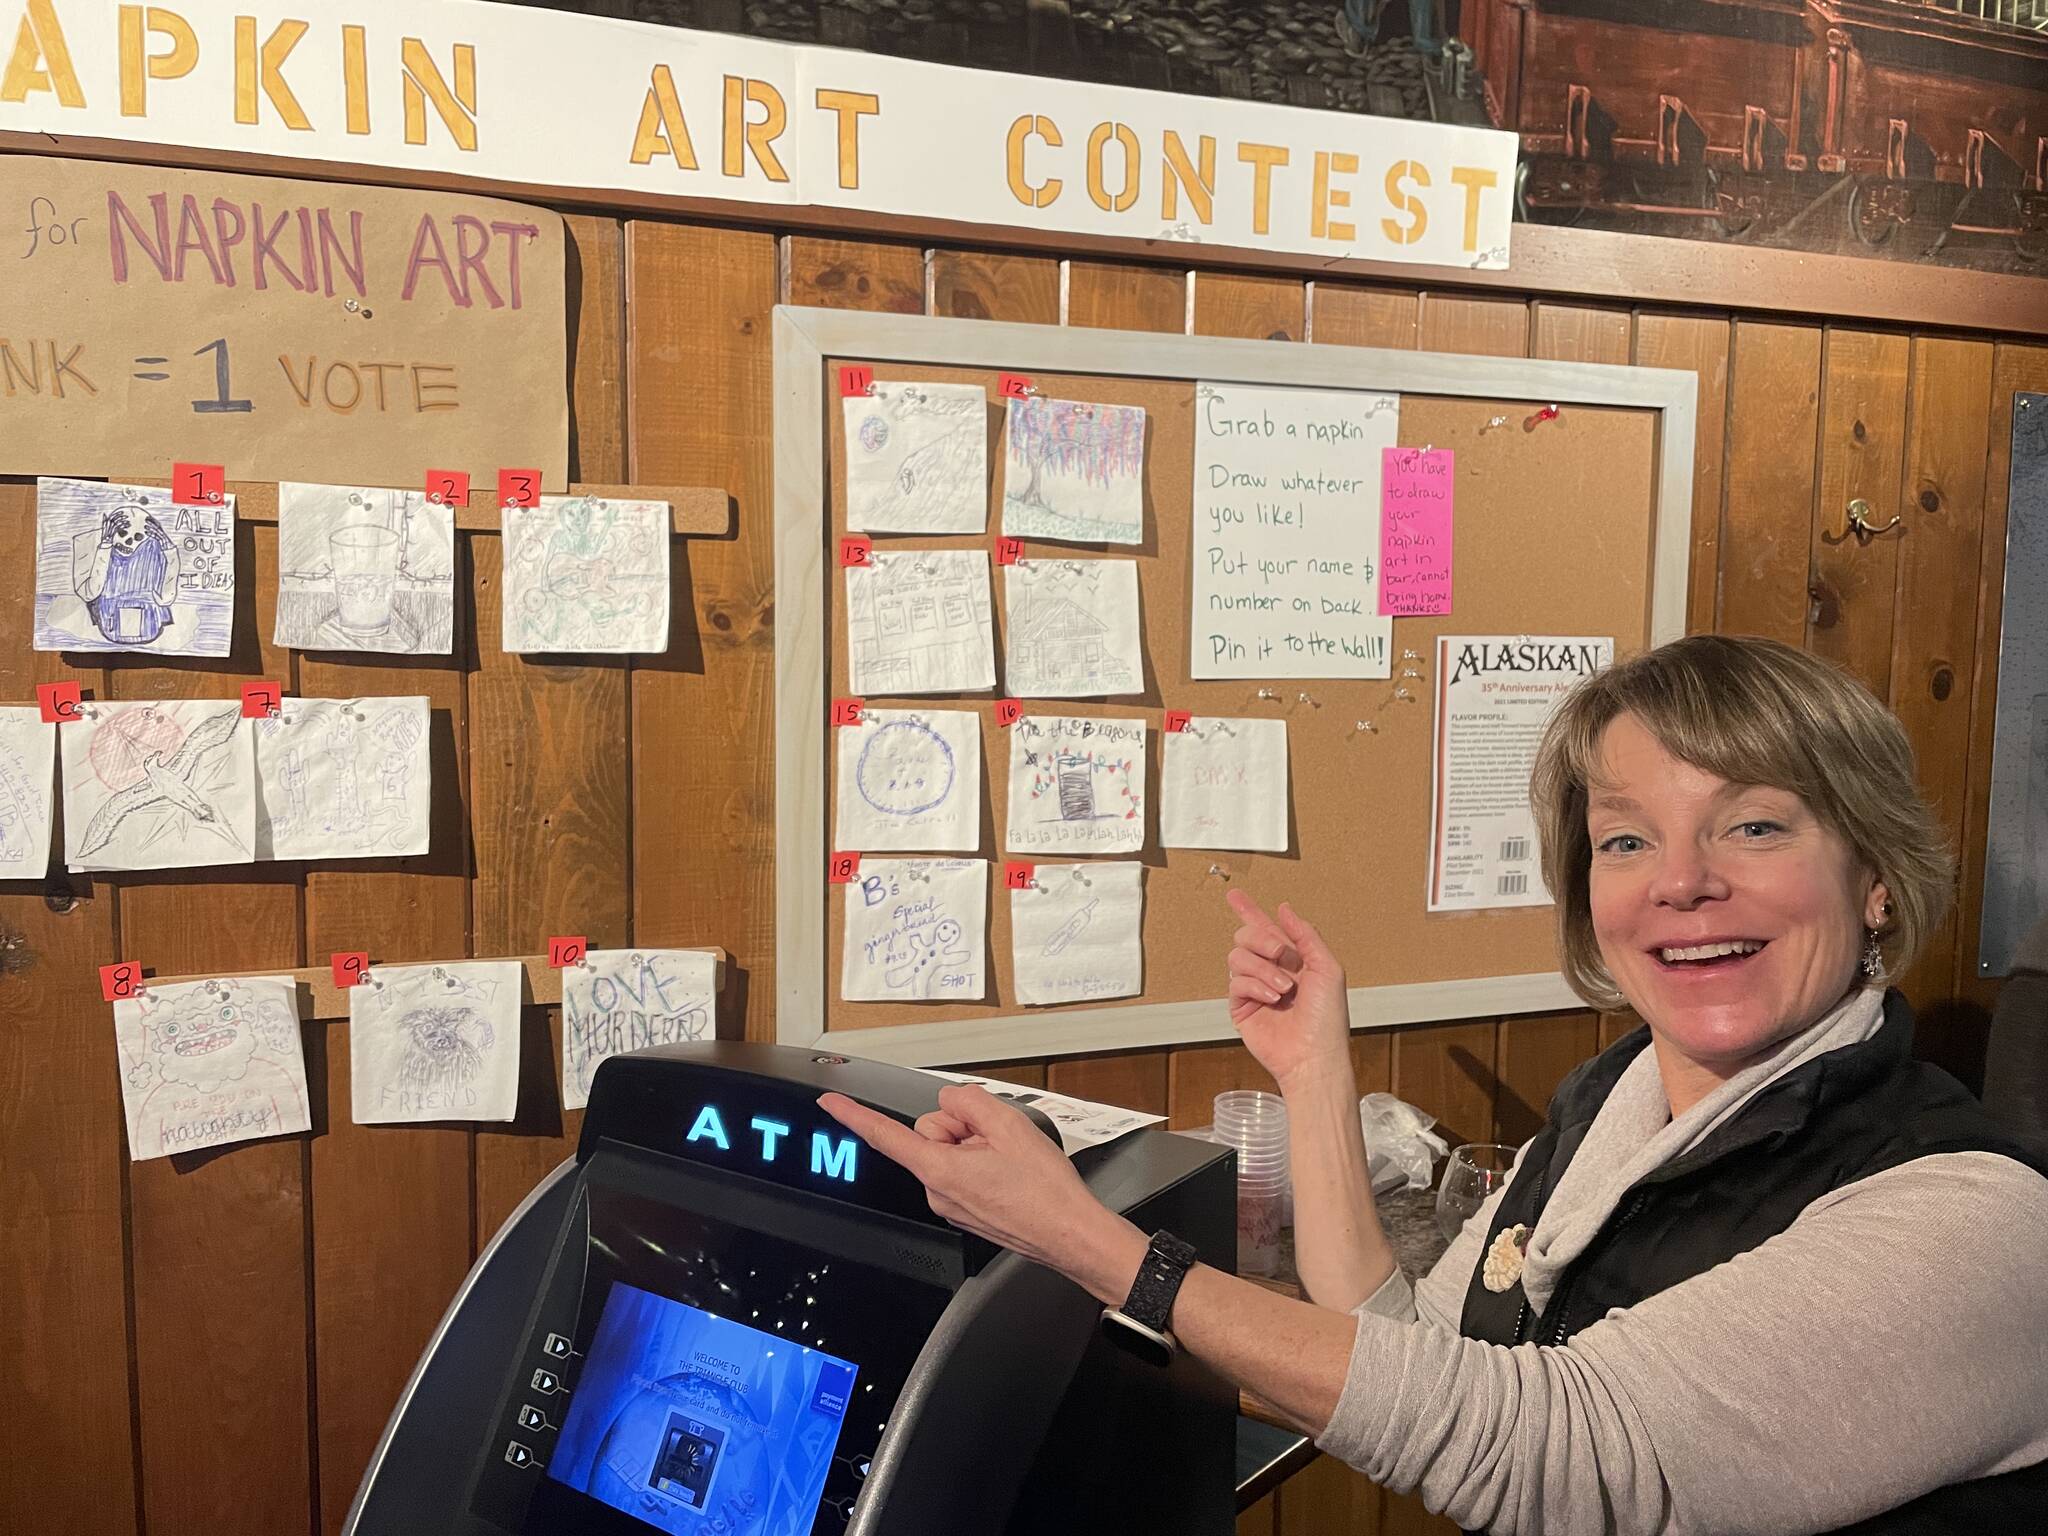 Triangle Club Bar owner Leeann Thomas shows off some of the art for the bar’s Napkin Art Contest during Gallery Walk on Dec. 3, 2021. (Michael S. Lockett / Juneau Empire)